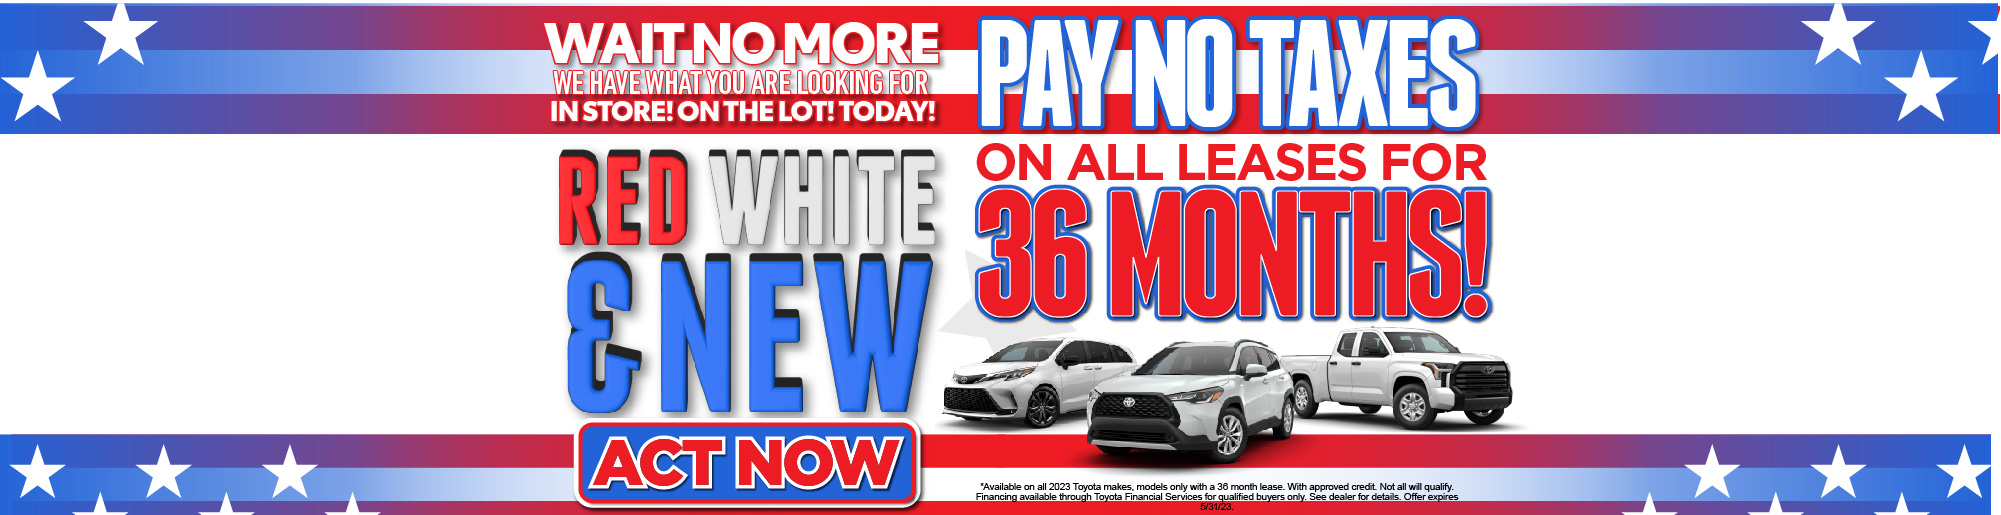 Pay No taxes! New Inventory Arriving Daily, Act Now